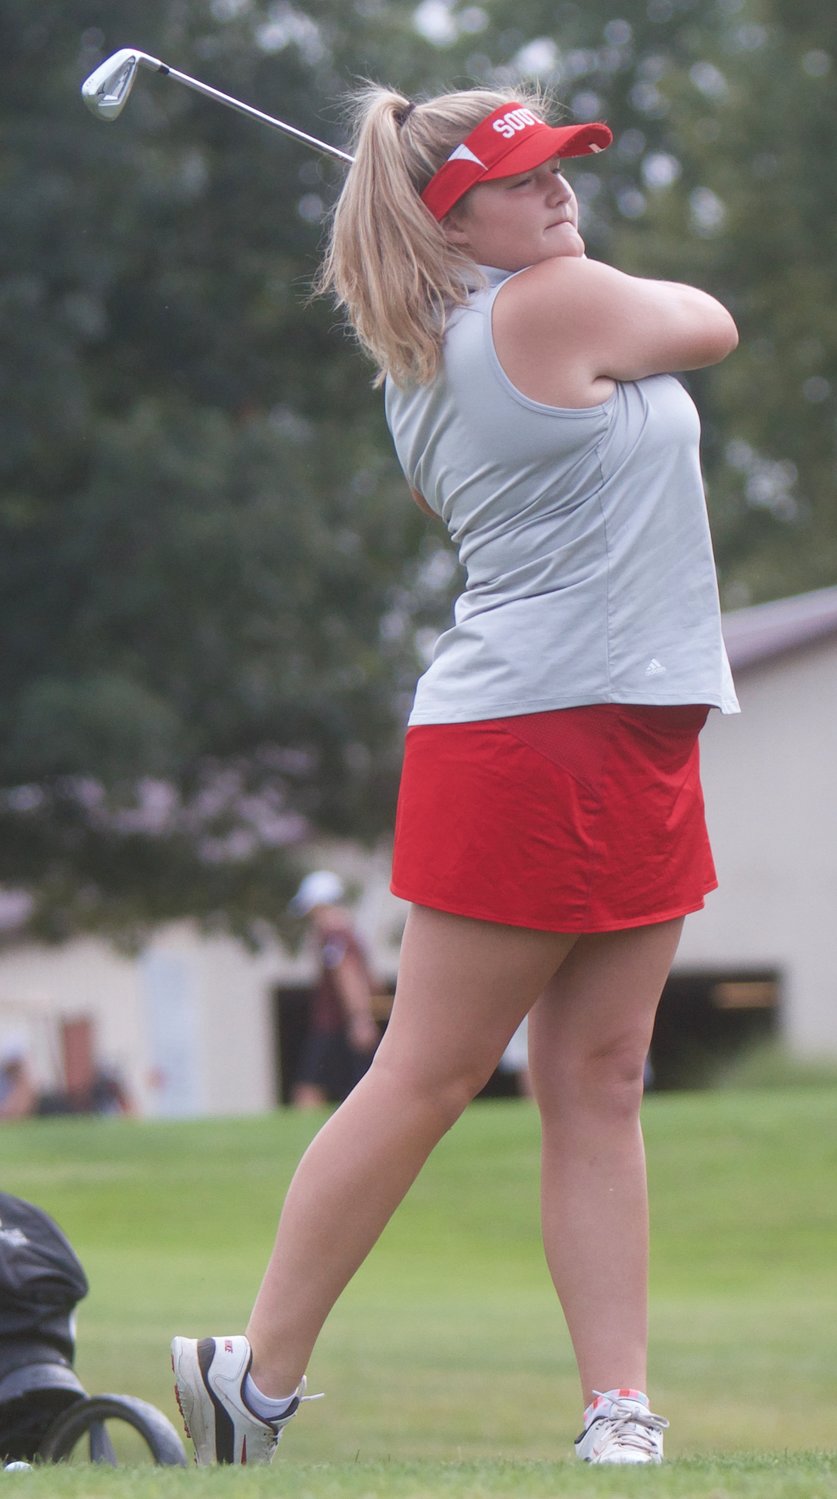 Southmont junior Macie Shirk was second overall at the county meet on Wednesday with a 47.